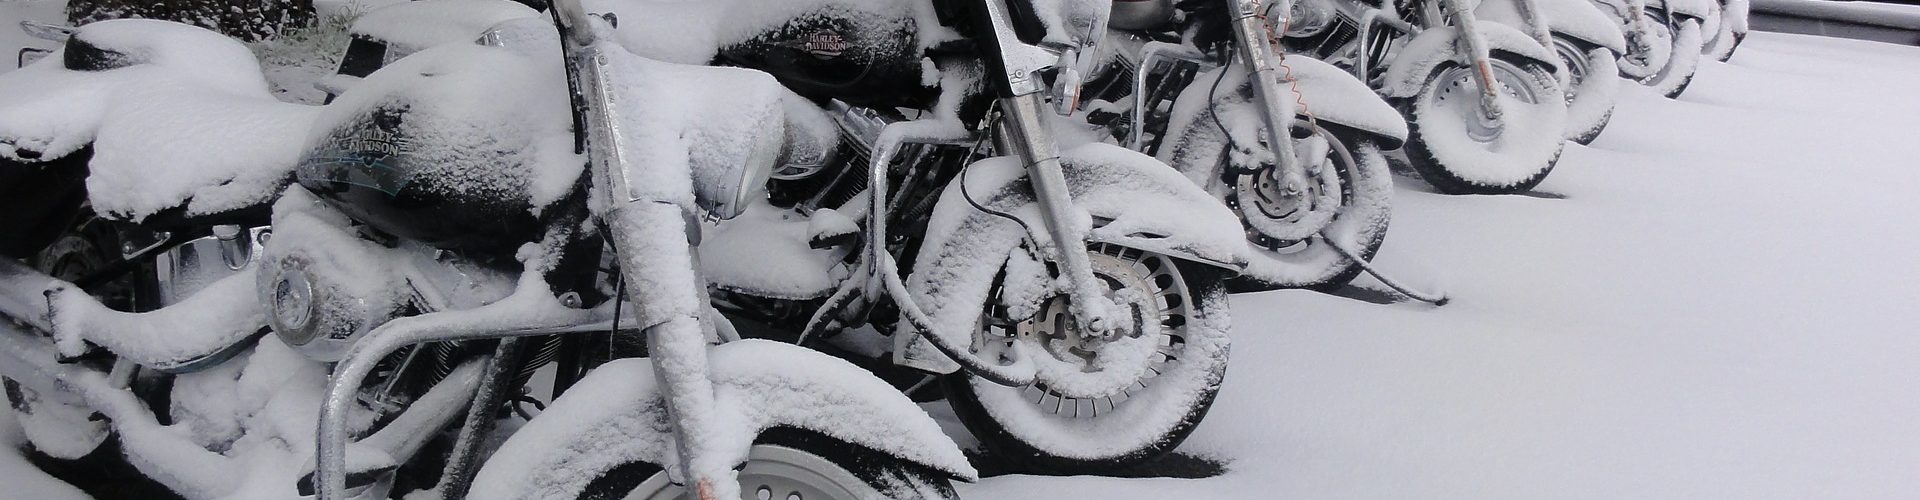 Motorcycle Winter Storage: How to Maintain Your Bike in the Cold